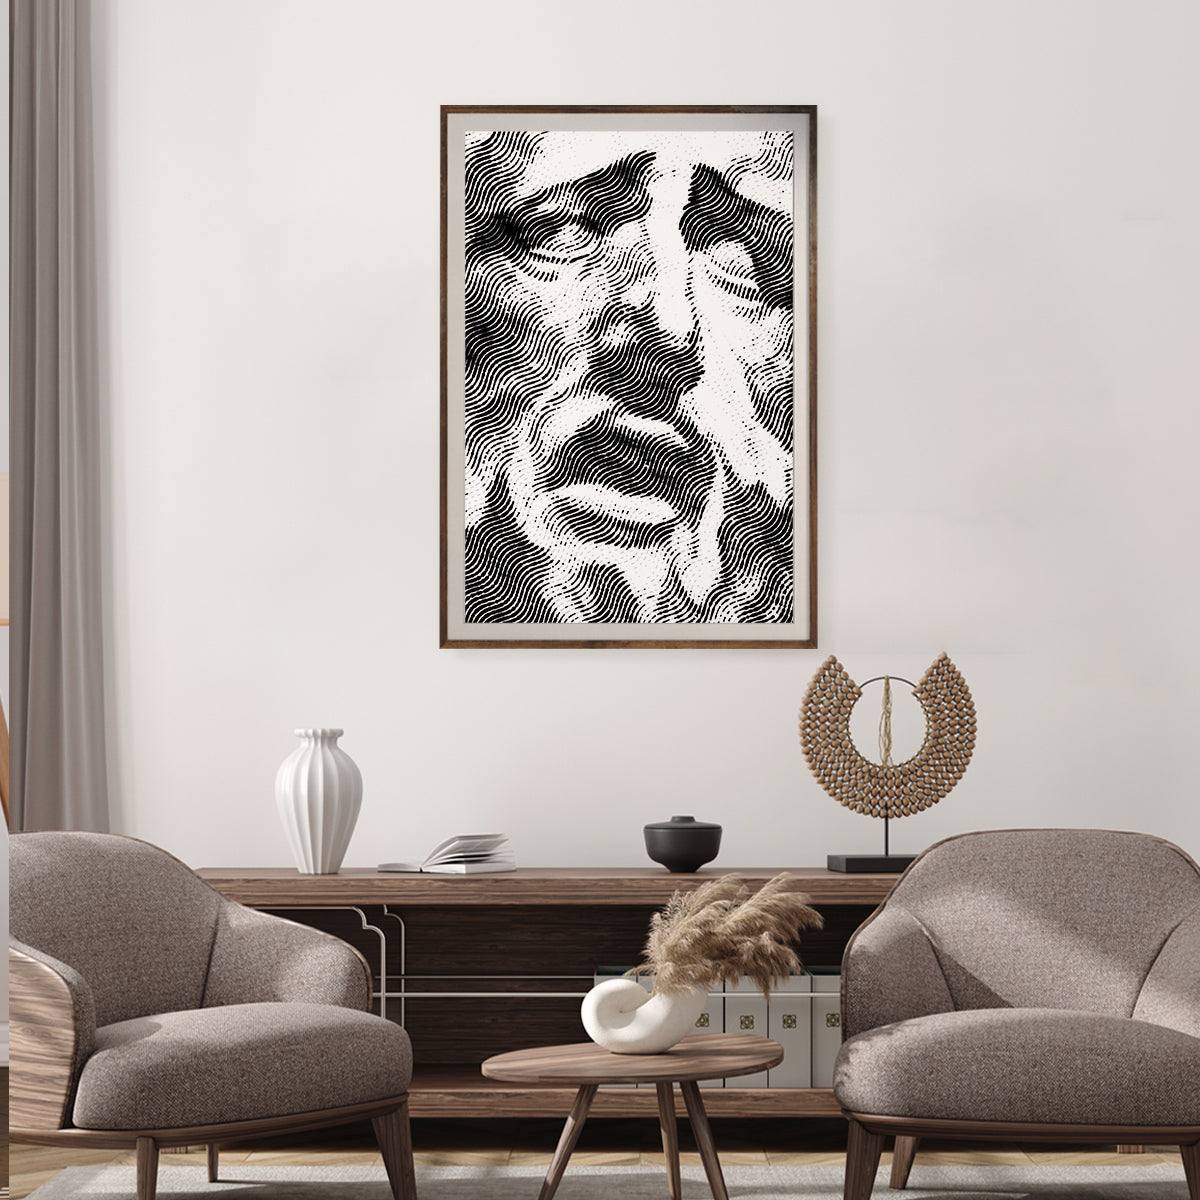 Ancient Greek Minimalist Portrait Black And White Wall Art Posters-Vertical Posters NOT FRAMED-CetArt-8″x10″ inches-CetArt